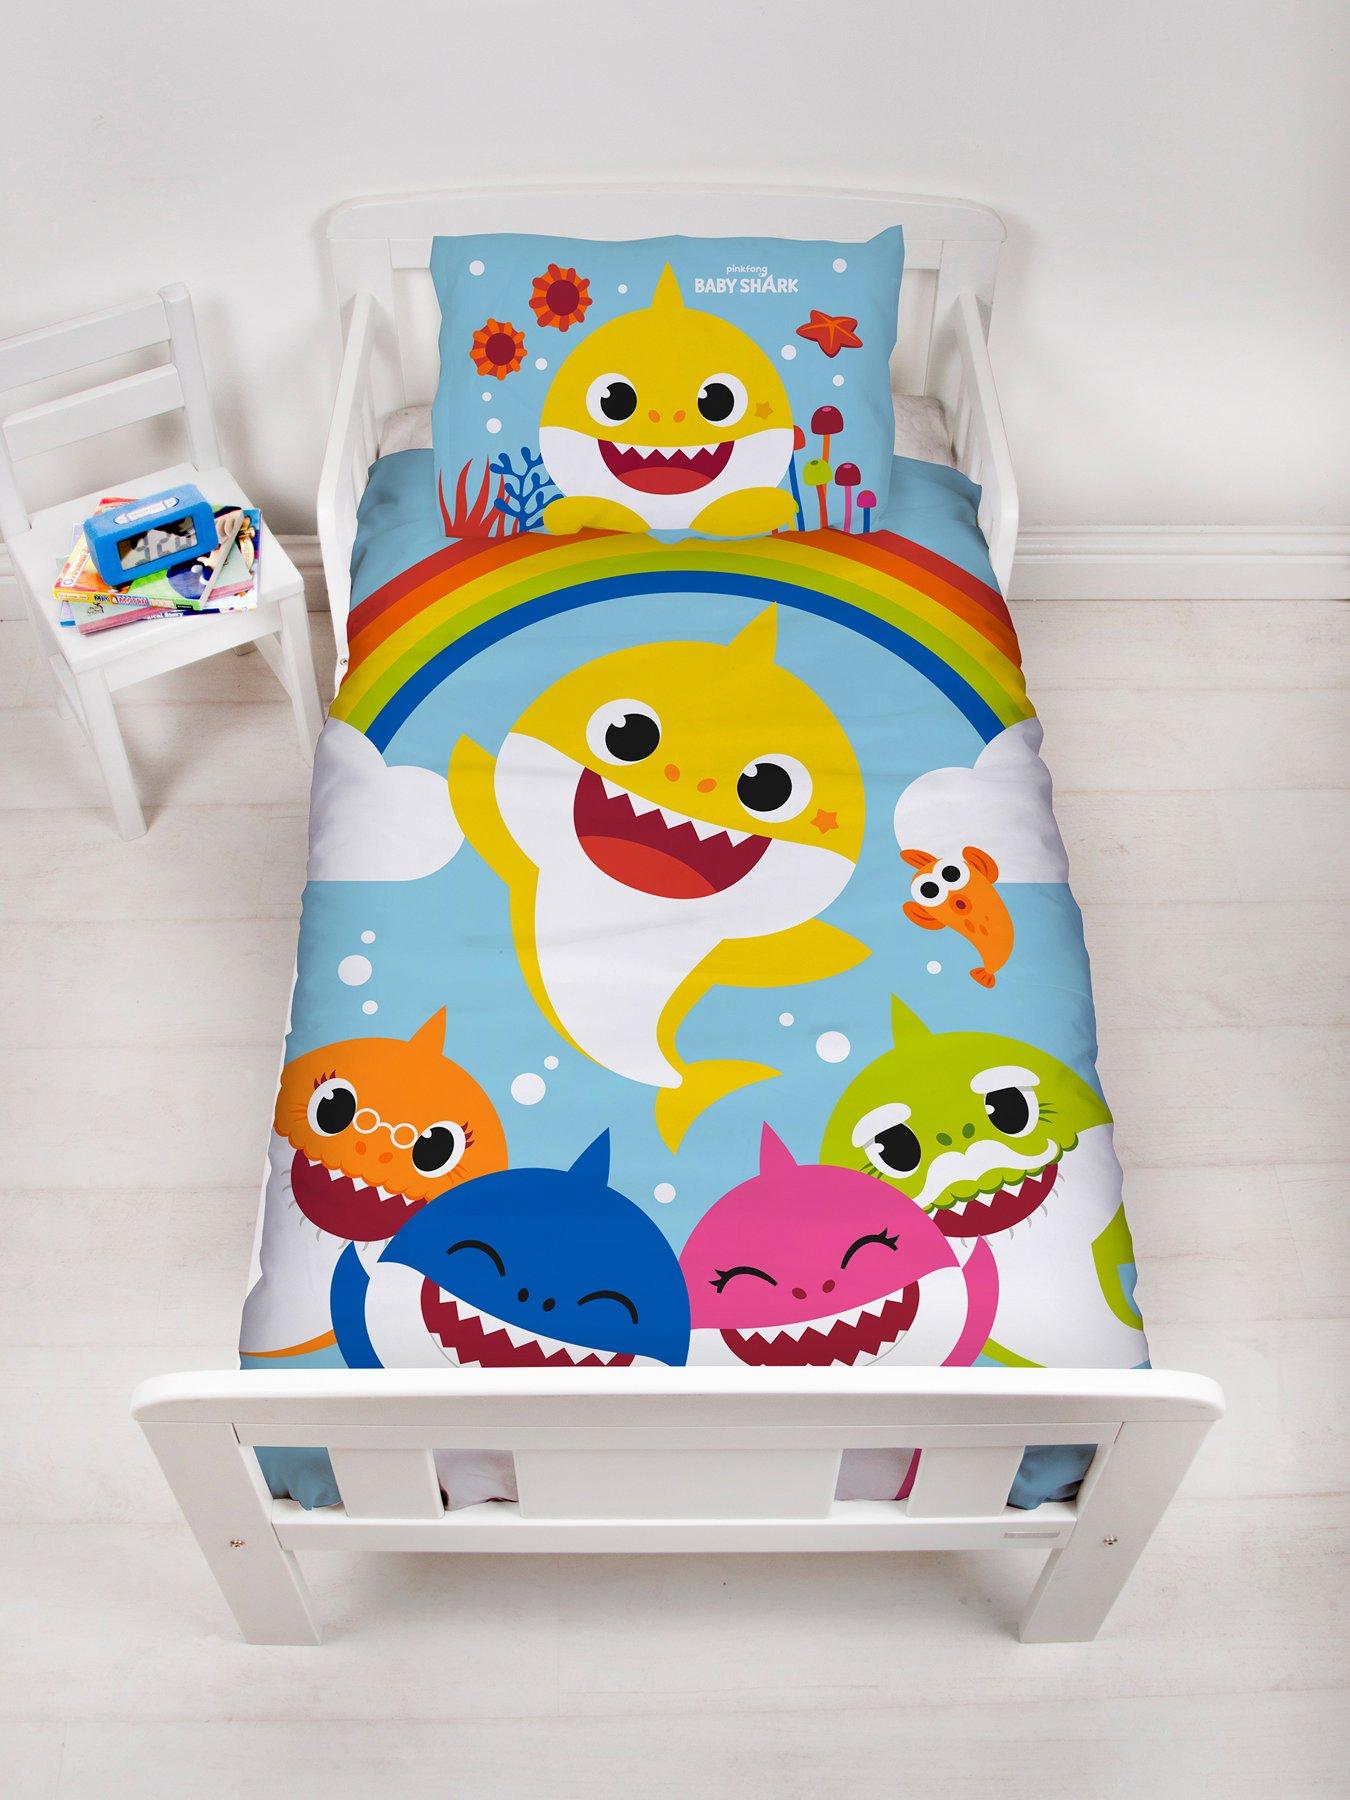 Details about   Heritage Kids Toddler Ultra-Soft Sleepy Unicorn Rainbow Easy-Wash Microfiber Bed